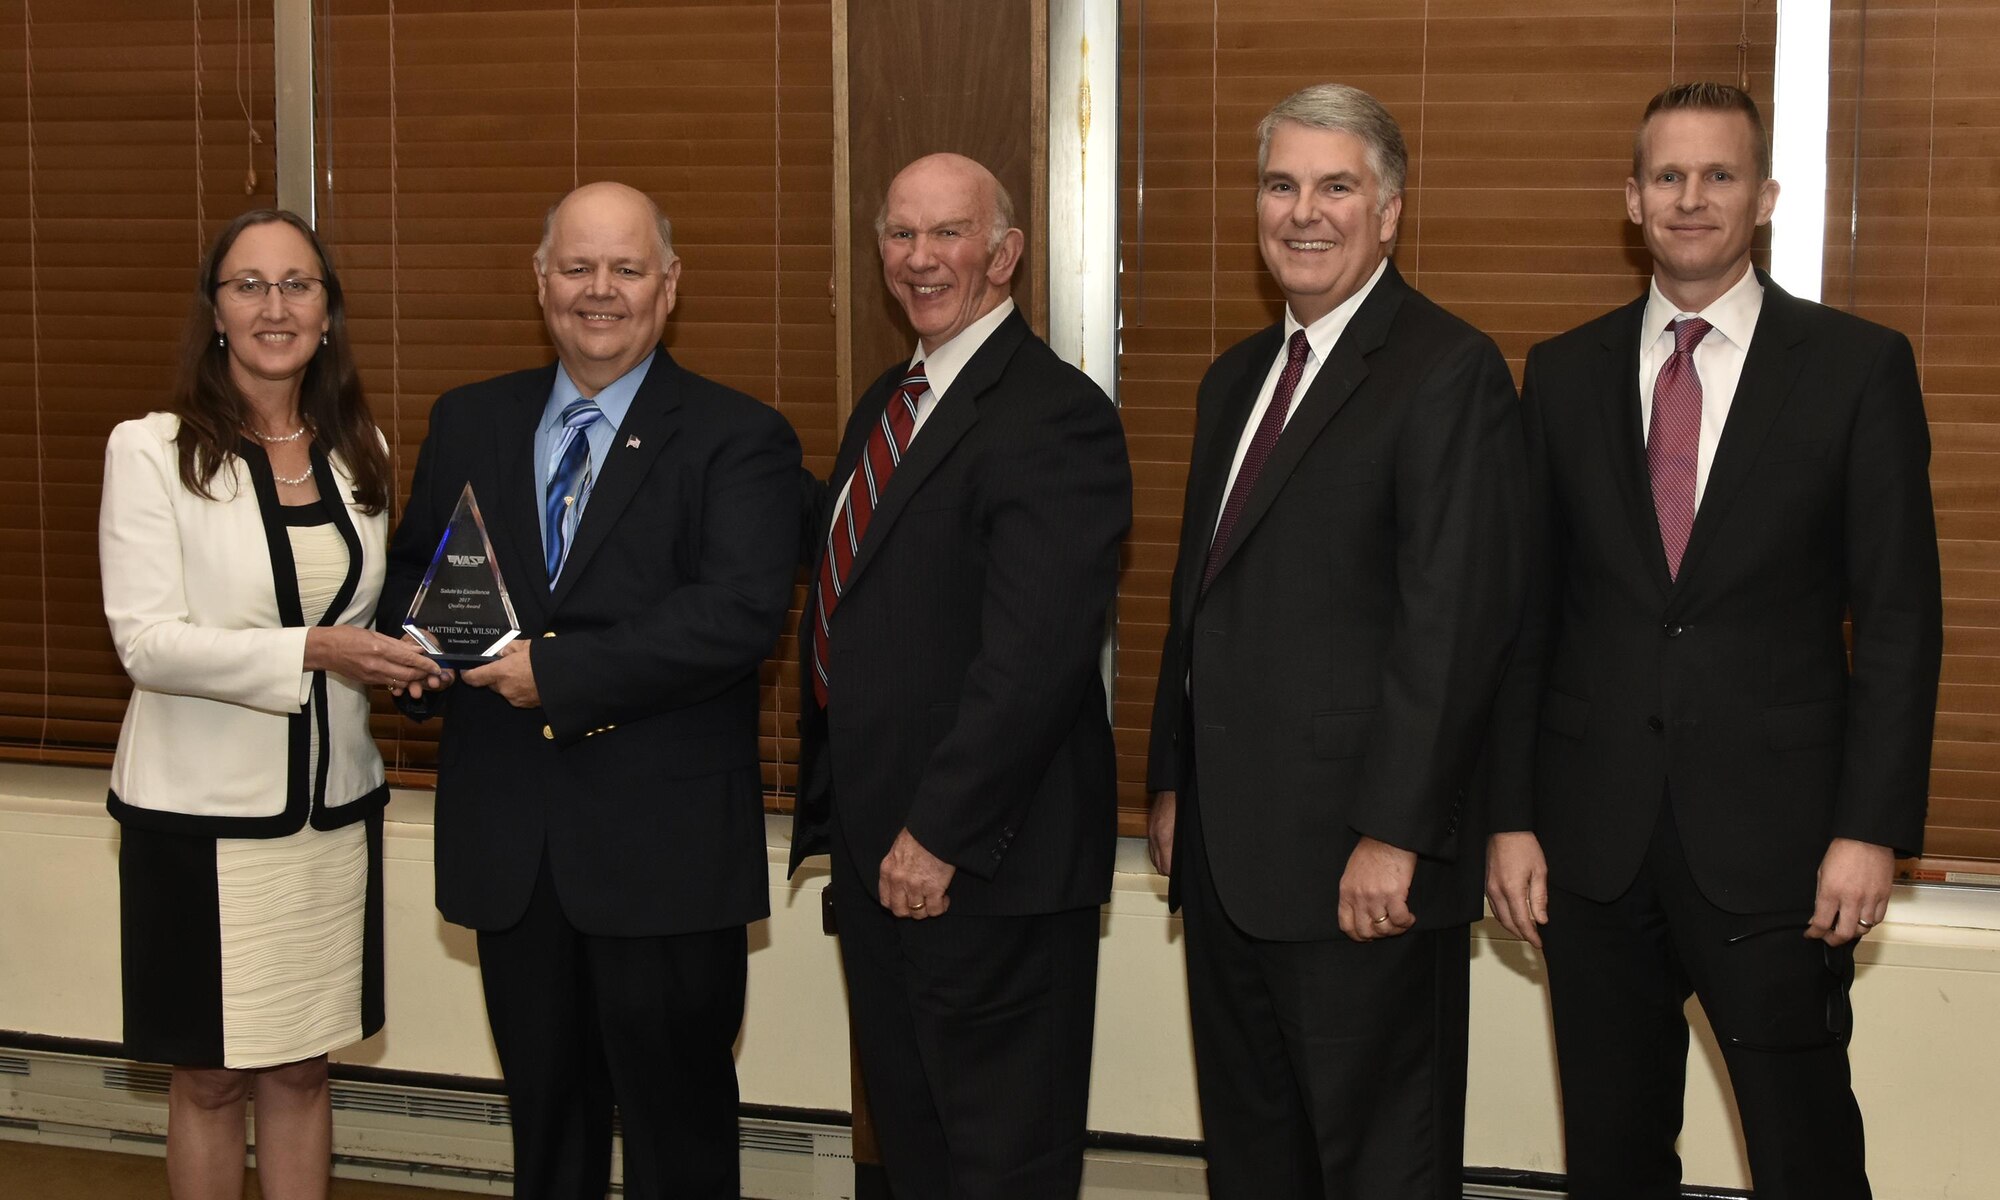 Matthew Wilson (second from left), NAS test operations quality specialist,  receives the Quality Award from NAS General Manager Cynthia Rivera during the National Aerospace Solutions 2017 Salute to Excellence Annual Awards Banquet held Nov. 16 at the Arnold Lakeside Center, Arnold AFB, Tenn.. Also pictured is NAS Deputy General Manager Doug Pearson, NAS Test and Sustainment Engineering Manager Jeff Henderson and NAS Integrated Resources Director Ben Souther. (U.S. Air Force photo/Rick Goodfriend)